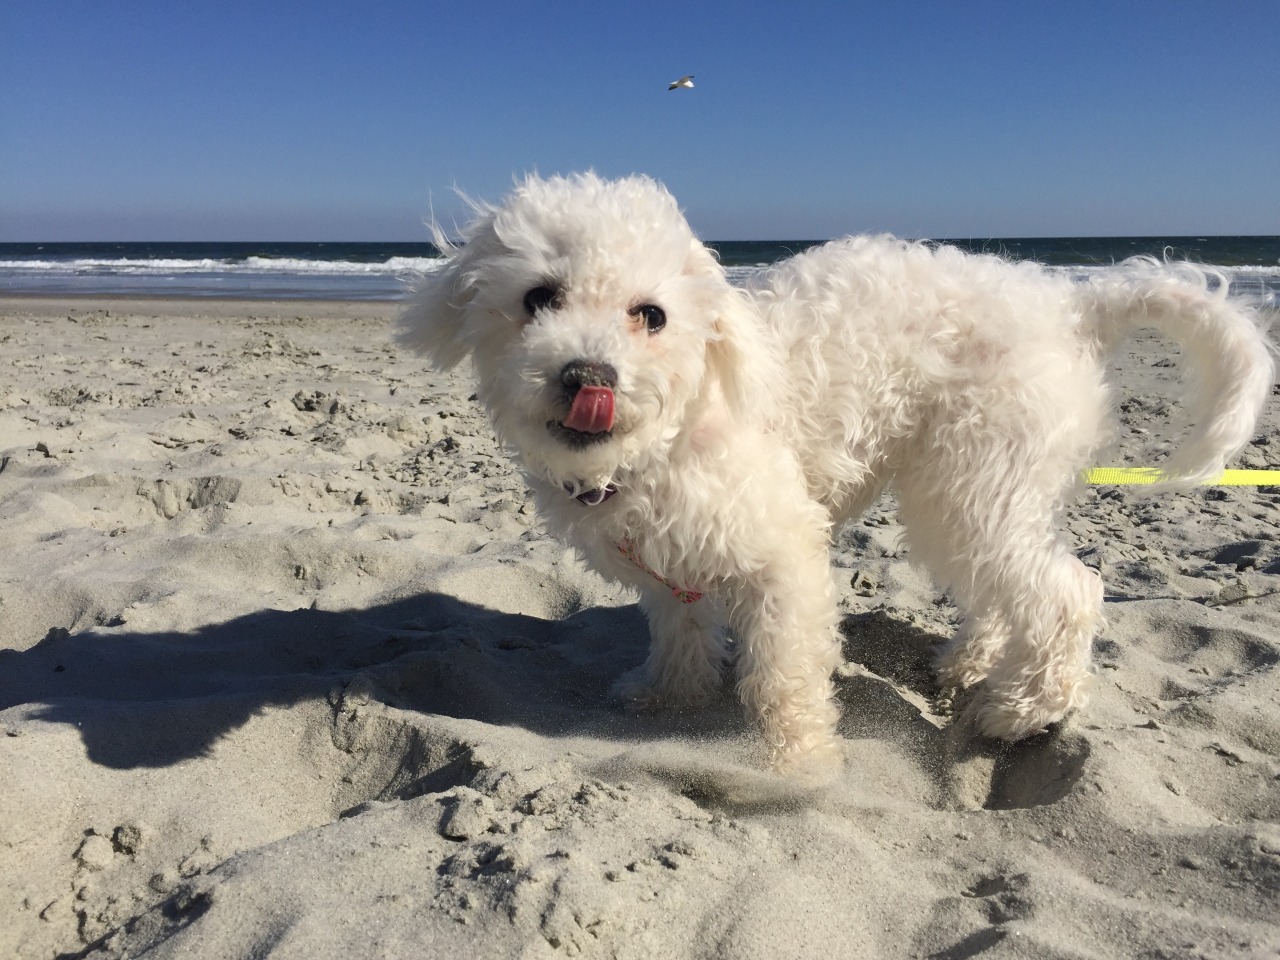 handsomedogs:  At 6 months old, Lily enjoyed her first ever beach trip by playing